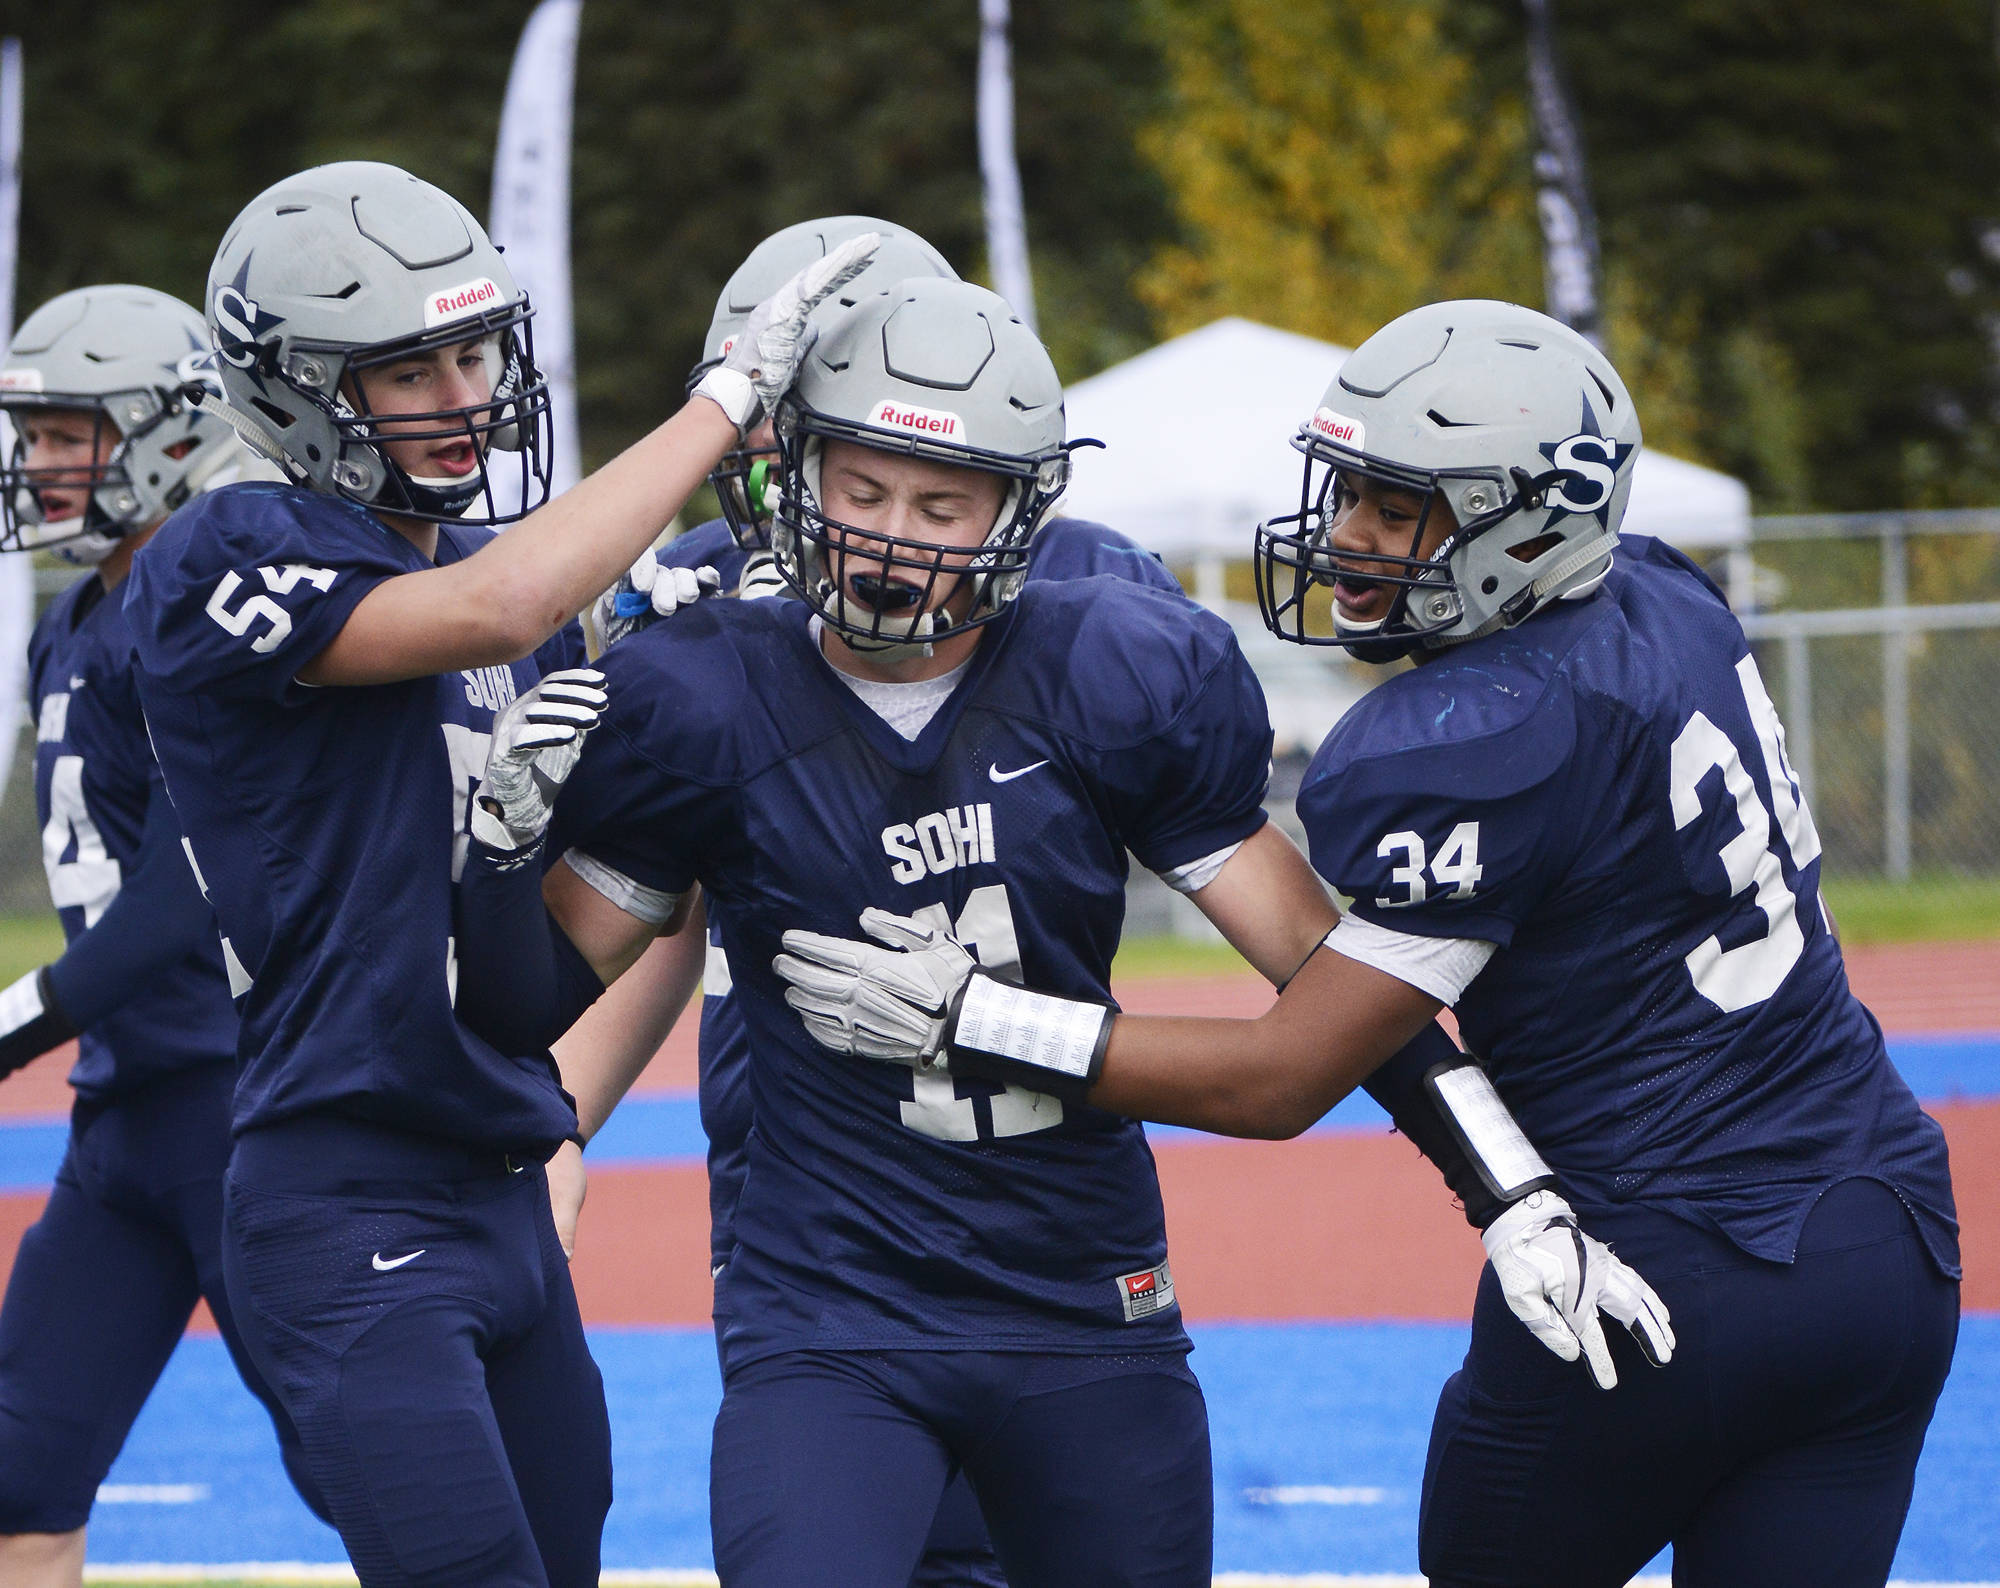 Soldotna running back Brenner Furlong (center) receives congratulations from teammates Zach Hanson (left) and Aaron Faletoi (right) after scoring a touchdown Sept. 16 at Justin Maile Field in Soldotna. (Photo by Joey Klecka/Peninsula Clarion)